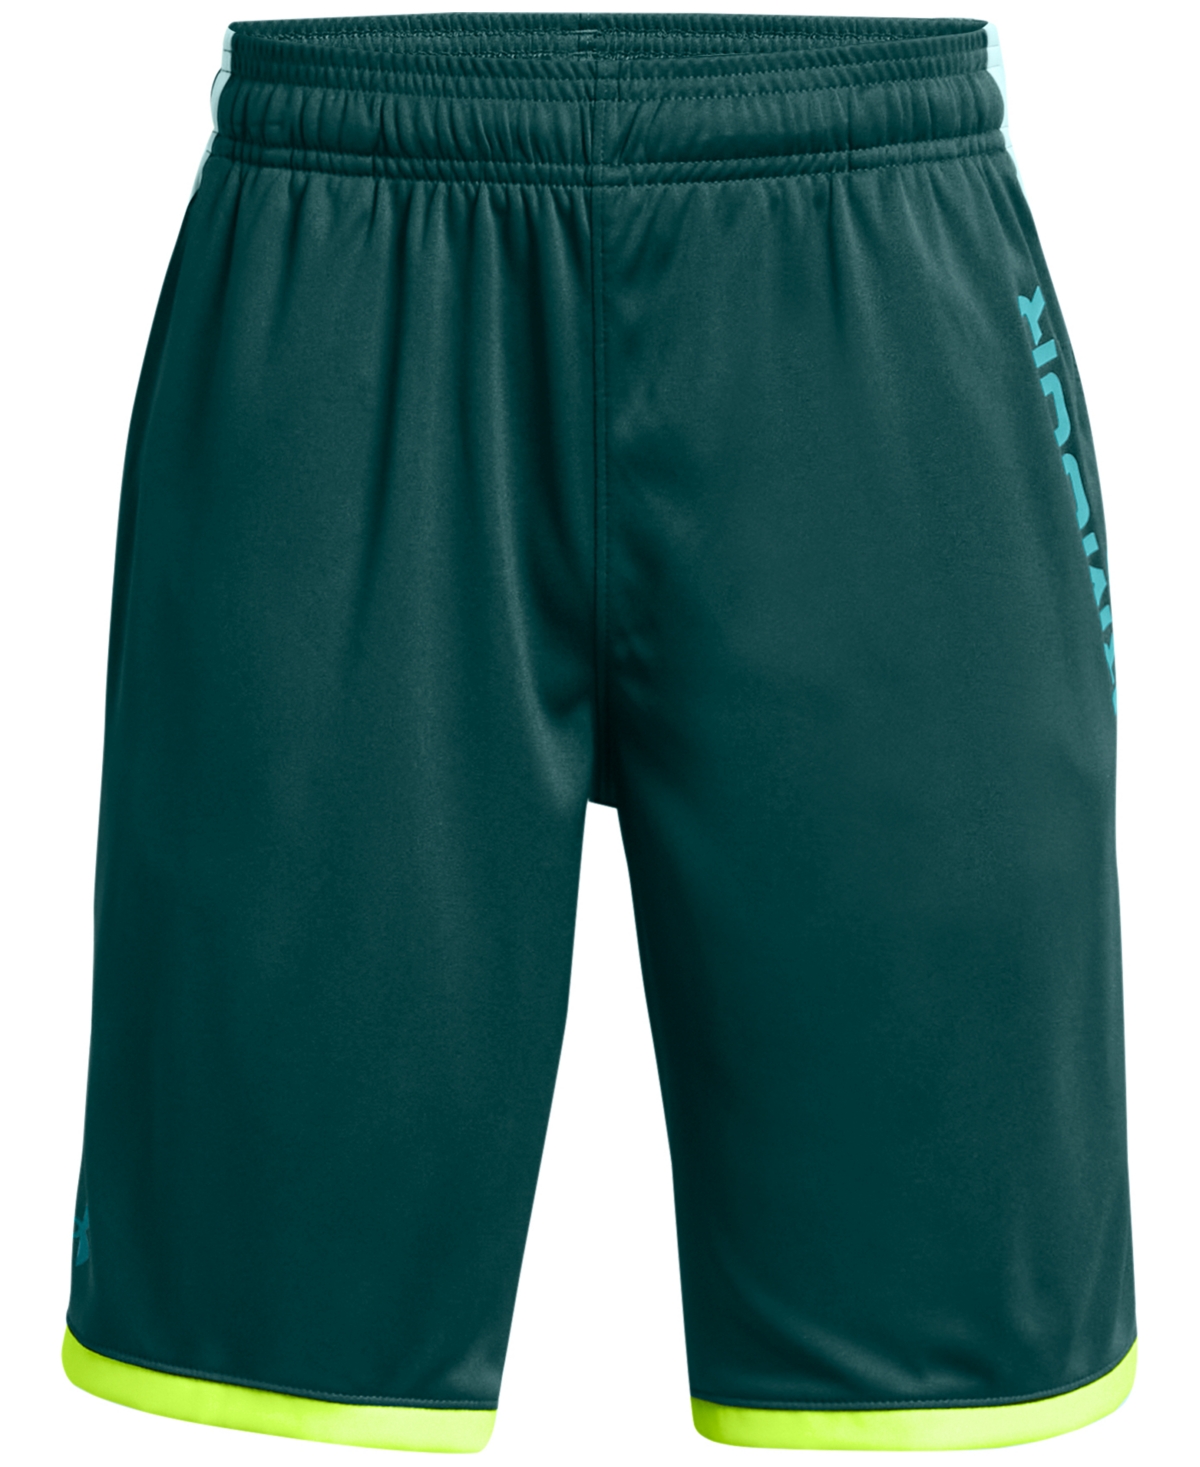 Under Armour Kids' Big Boys Stunt 3.0 Printed Shorts In Hydro Teal,high-vis Yellow,circuit T